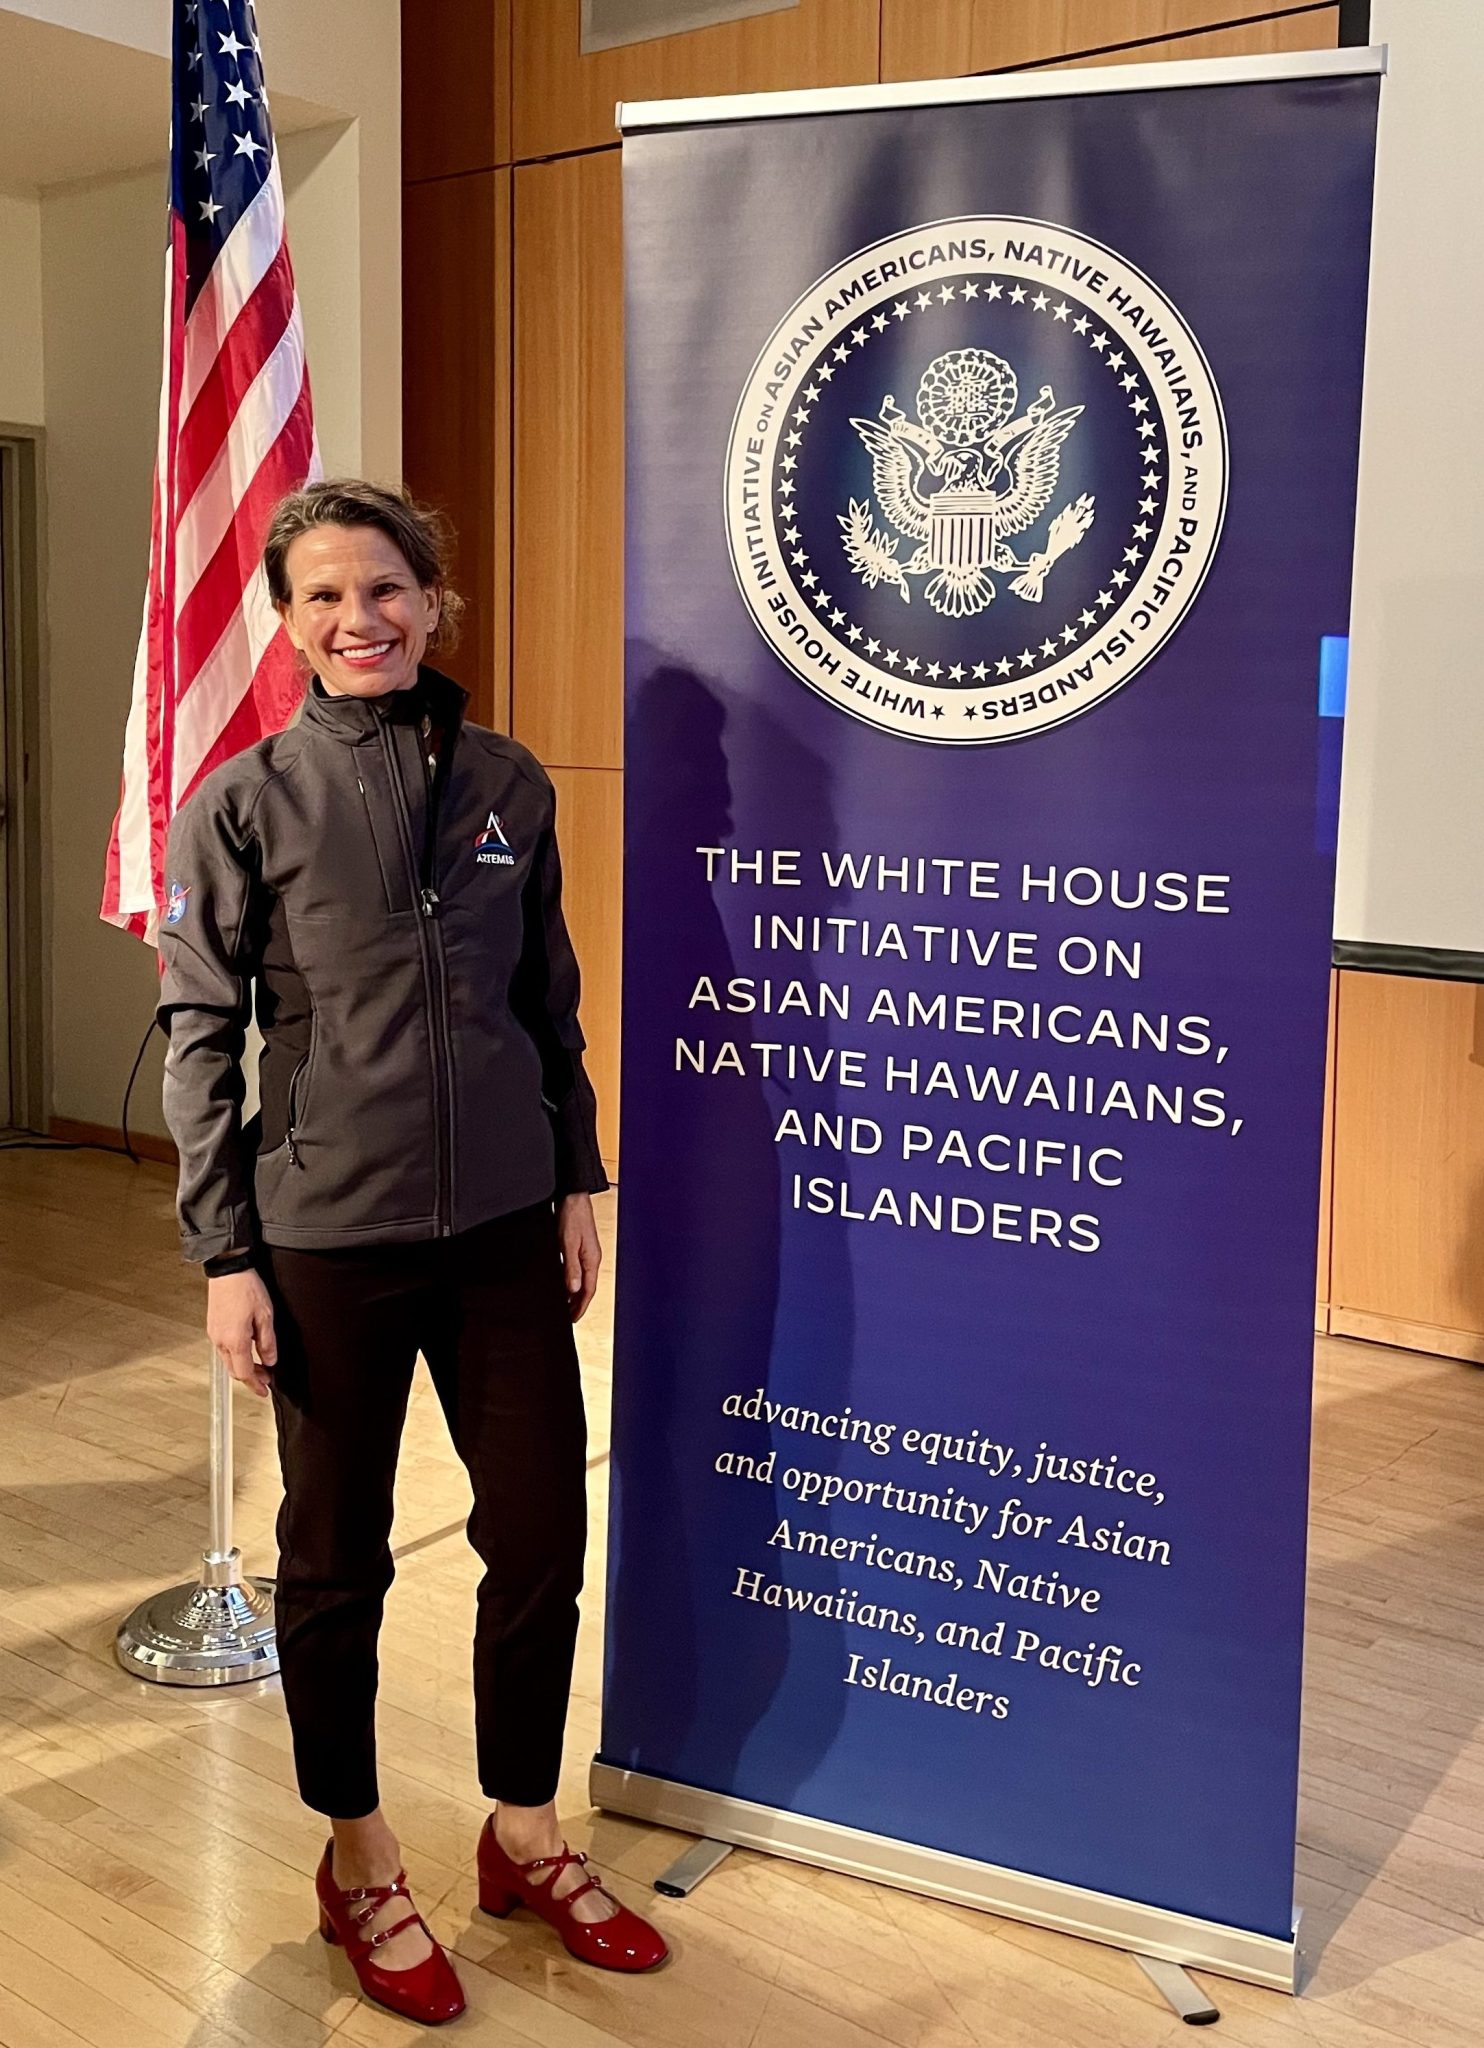 Jennifer Krottinger wears a grey Artemis jacket with black pants and red shoes and smiles next to a sign that says "The White House Initiative on Asian Americans, Native Hawaiians, and Pacific Islanders." An American flag is behind her.